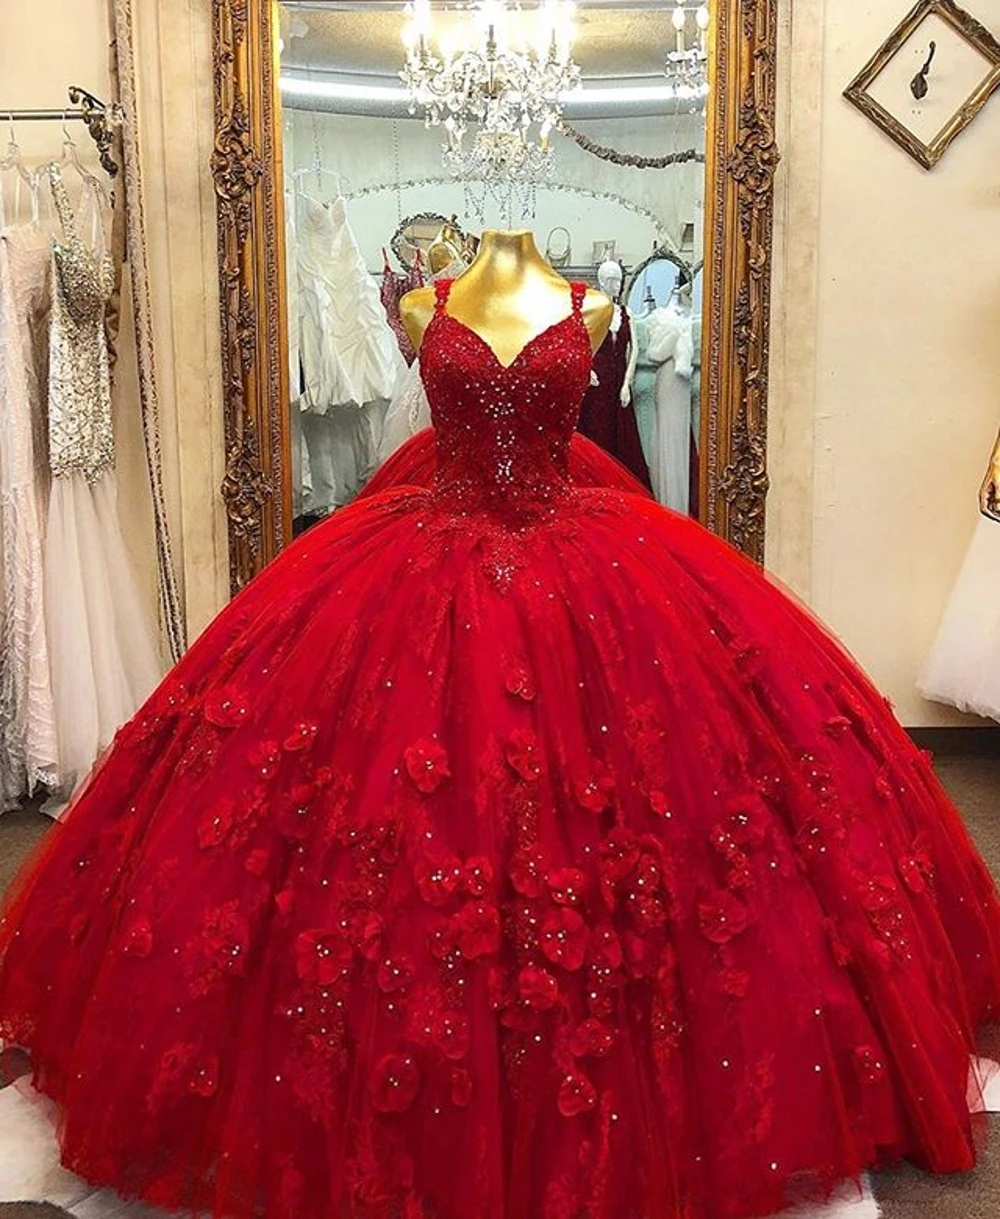 

2020 Red Quinceanera Ball Gown Dresses 3D Floral Flowrs Sweet 16 Dress Floor Length Puffy Party Gowns vestidos de 15 años